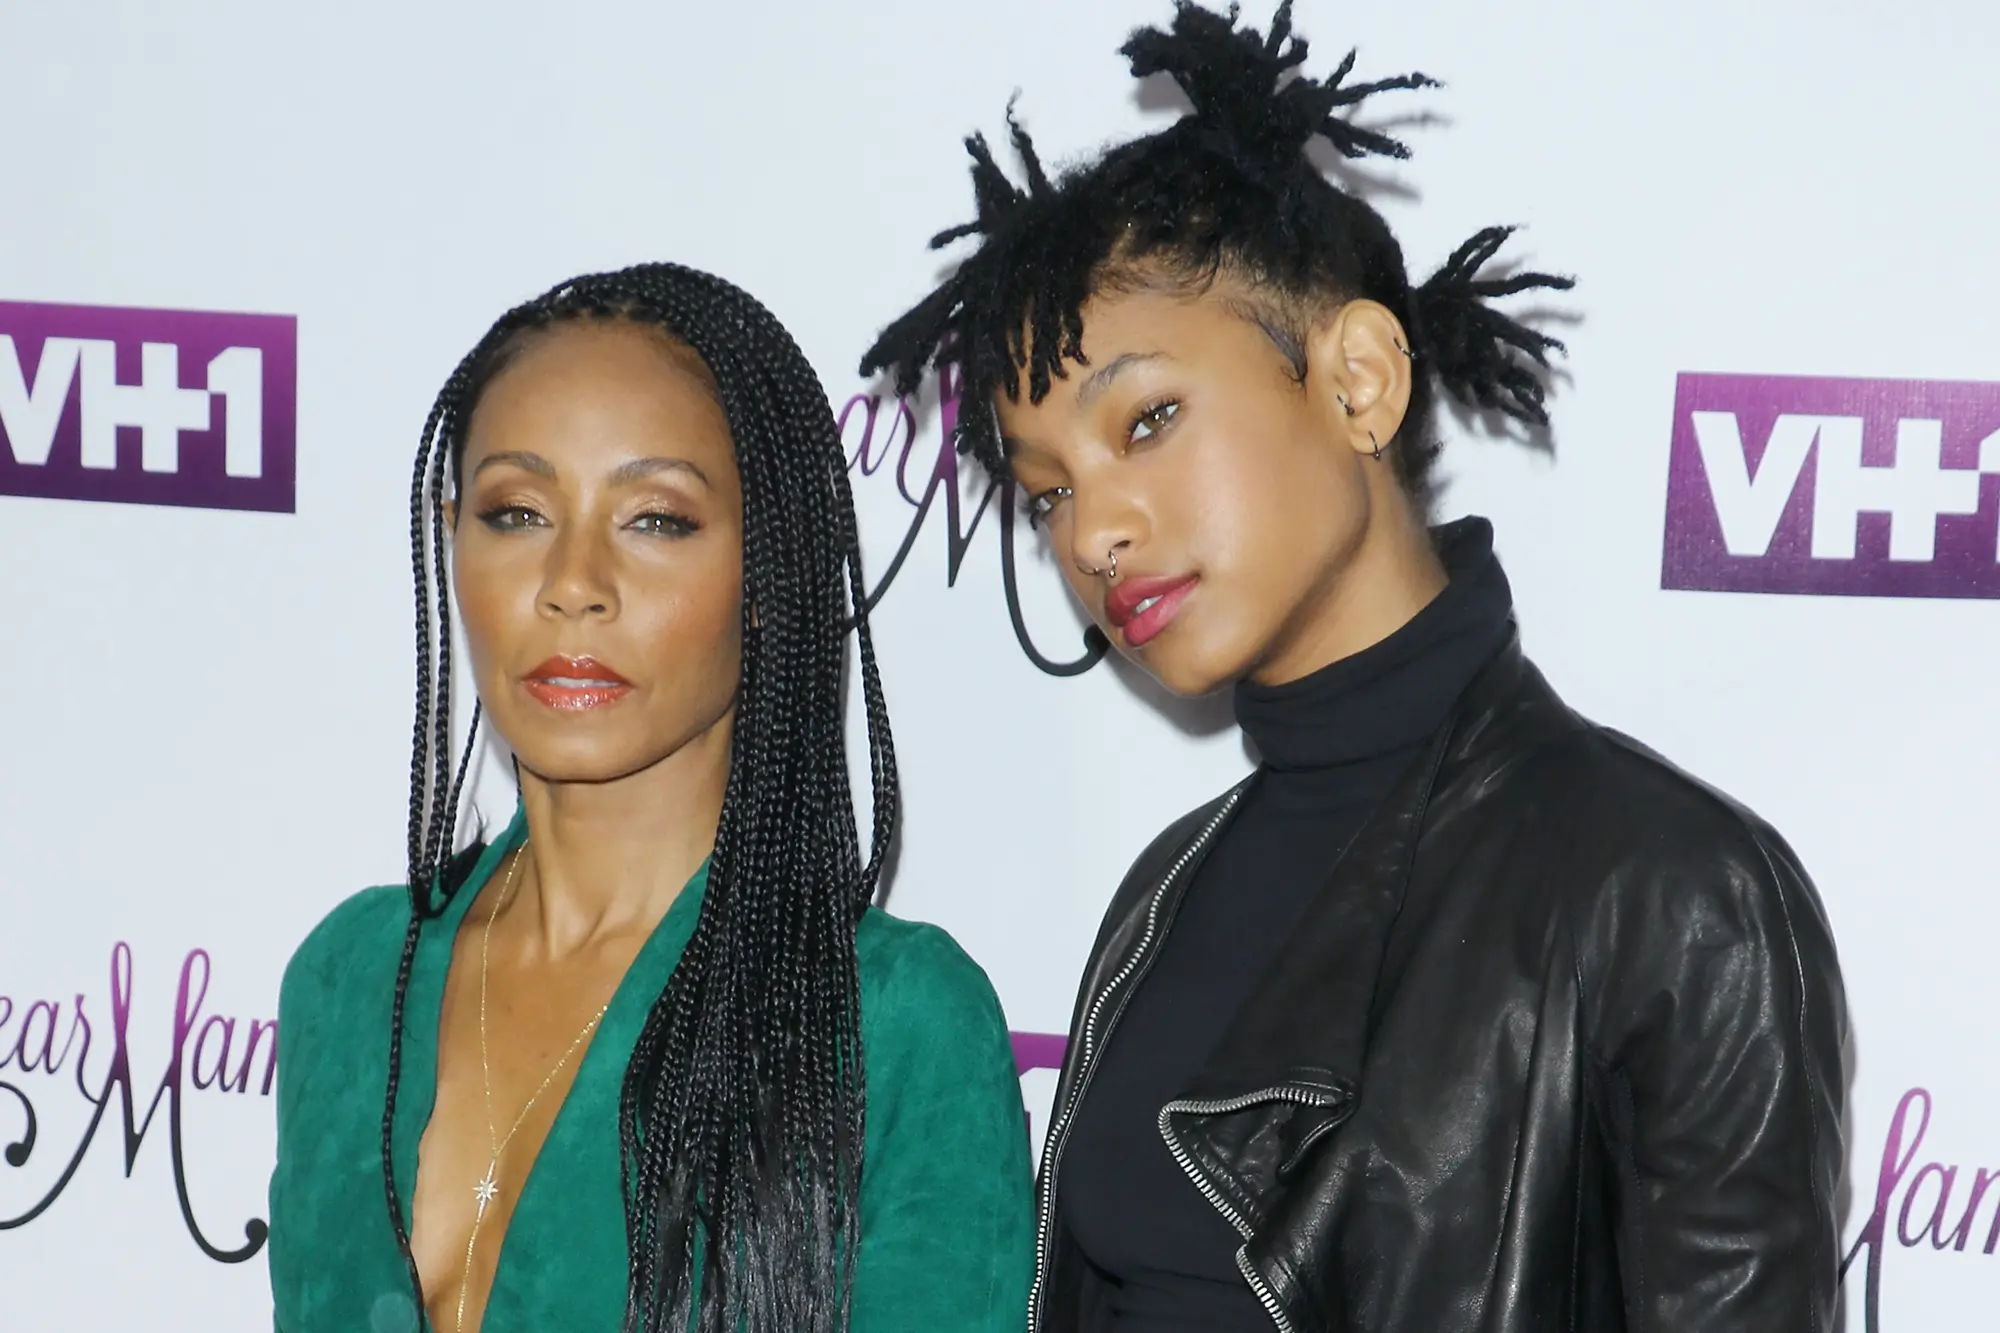 Willow Smith given differential treatment by Jada Pinkett Smith 